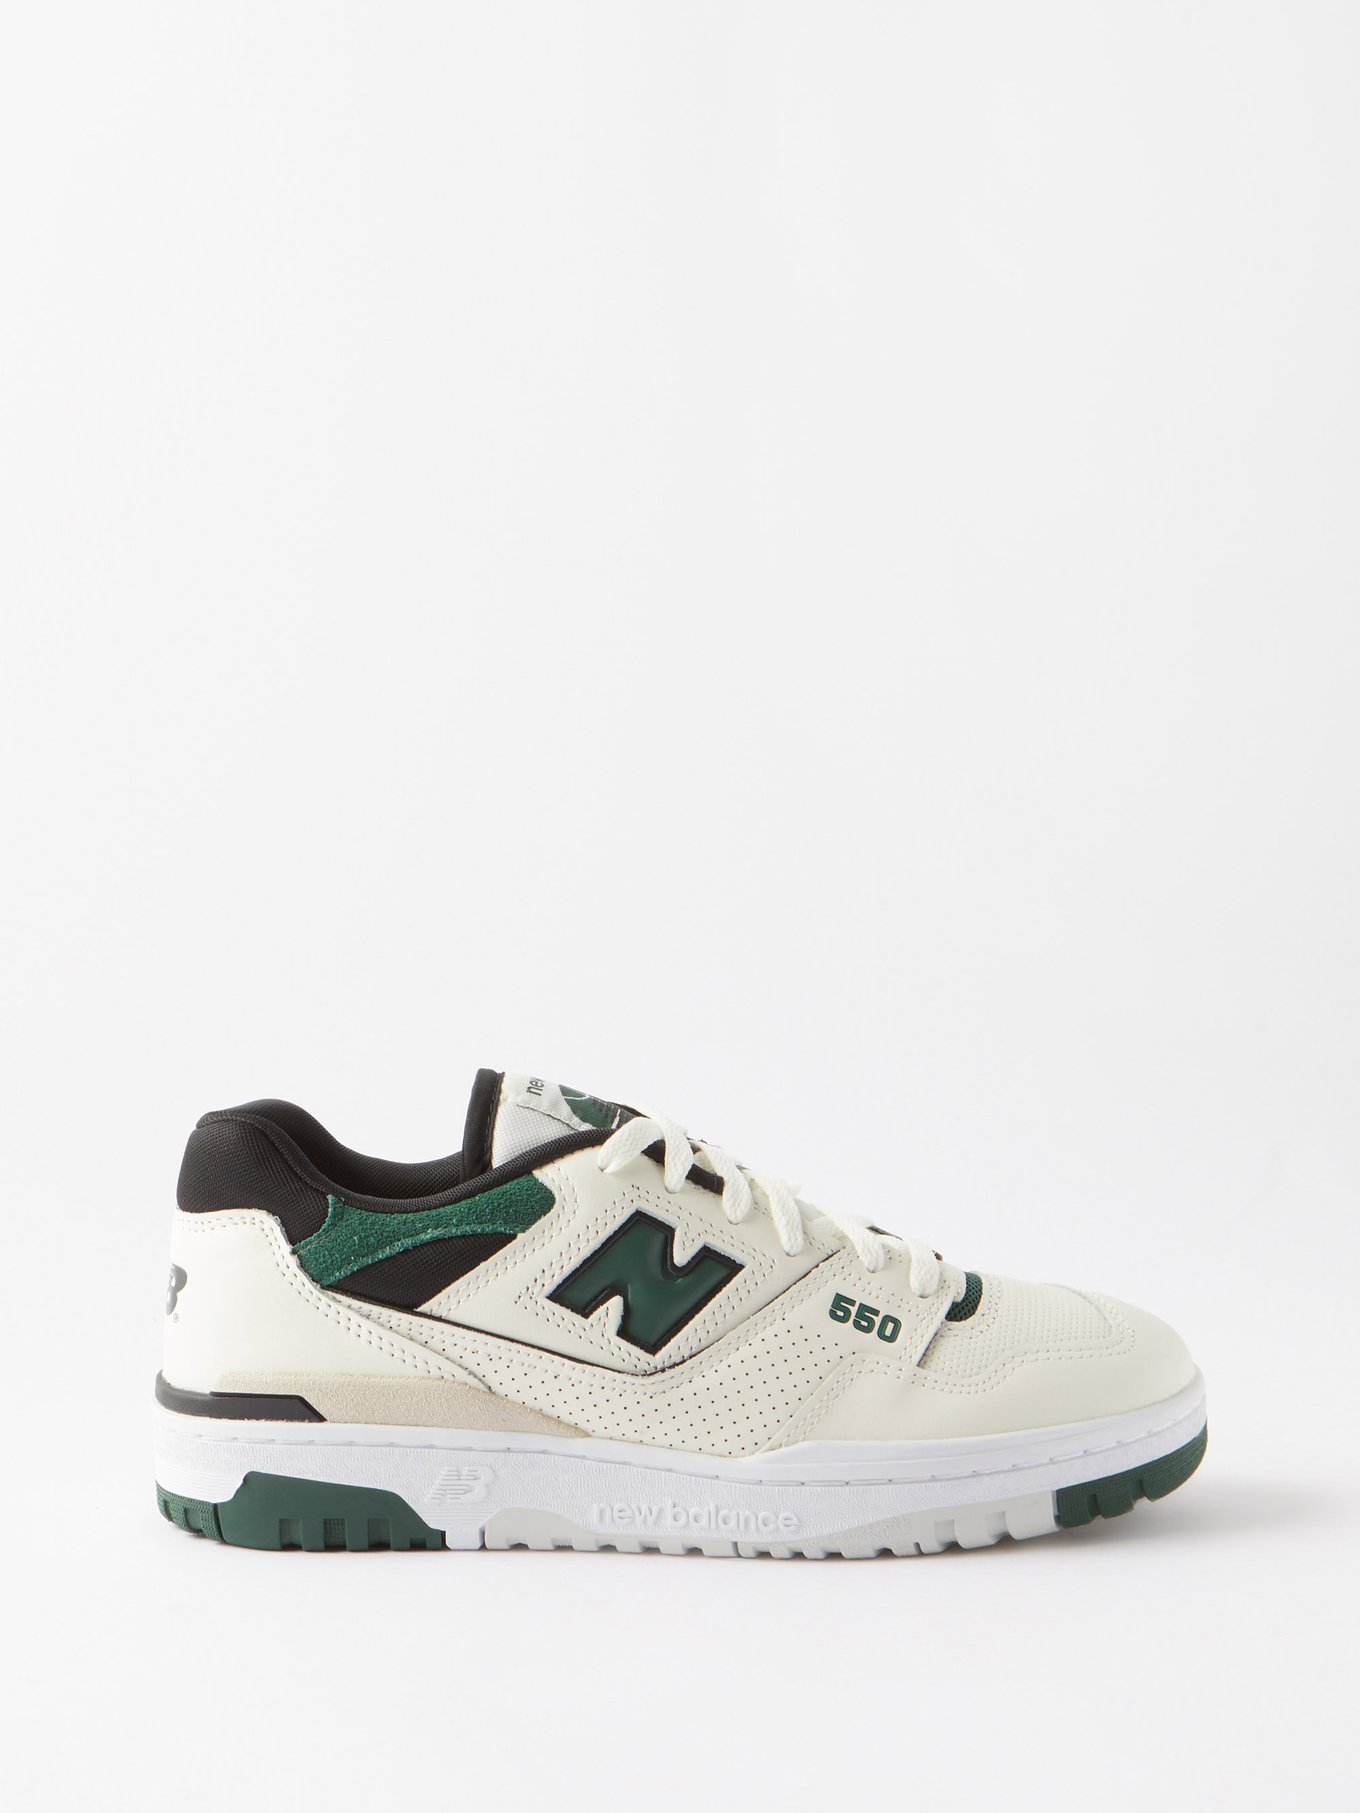 Green 550 Premium leather and mesh trainers, New Balance